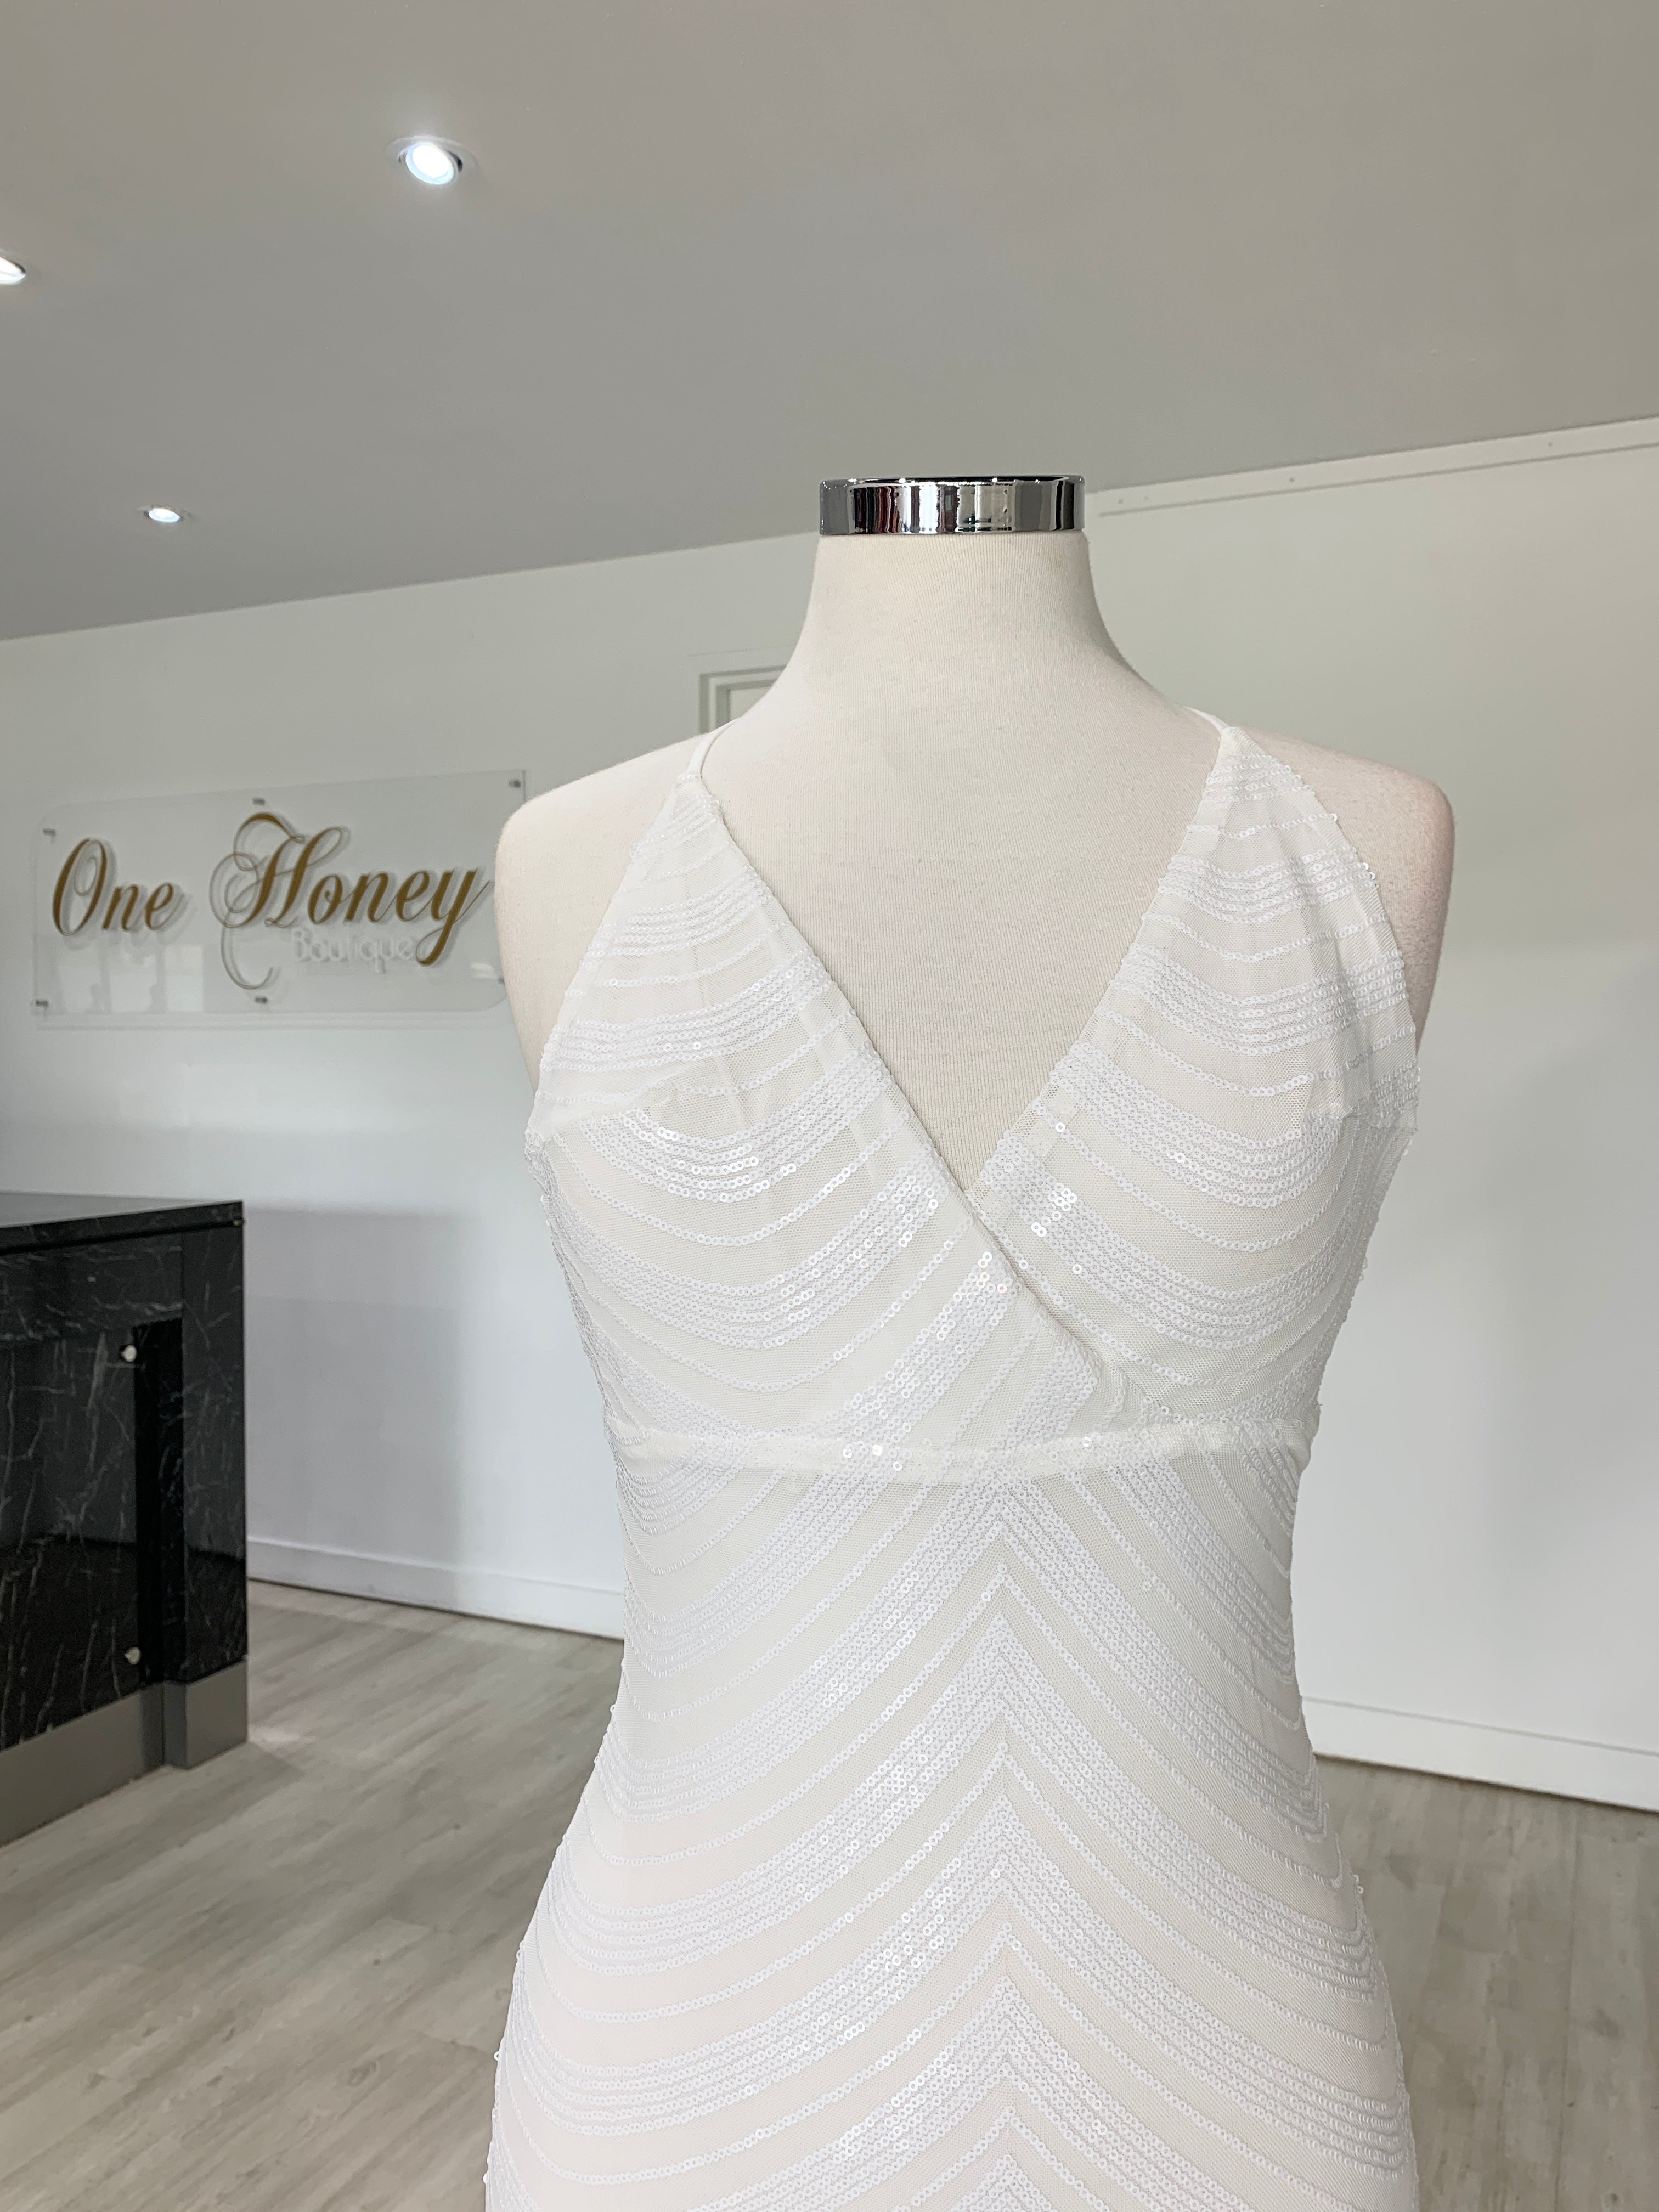 Honey Couture HEIDY White Sequin Mermaid Formal Dress {vendor} AfterPay Humm ZipPay LayBuy Sezzle